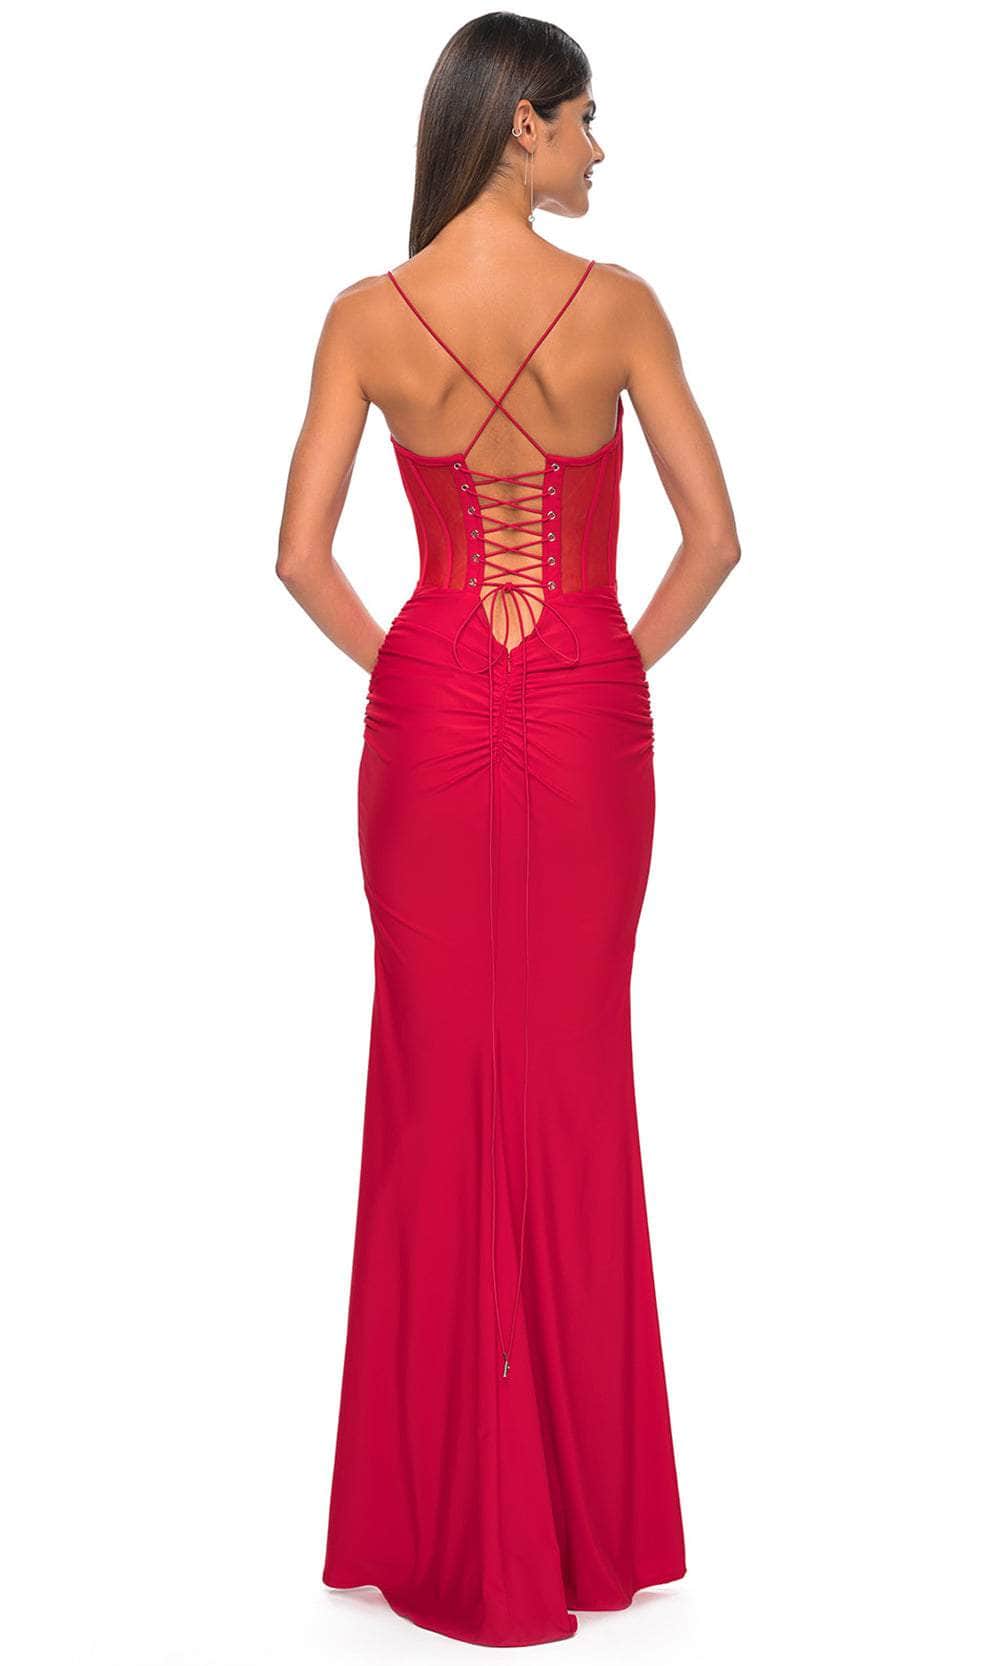 La Femme 32258 - Spaghetti Strap Fitted Prom Gown Evening Dresses